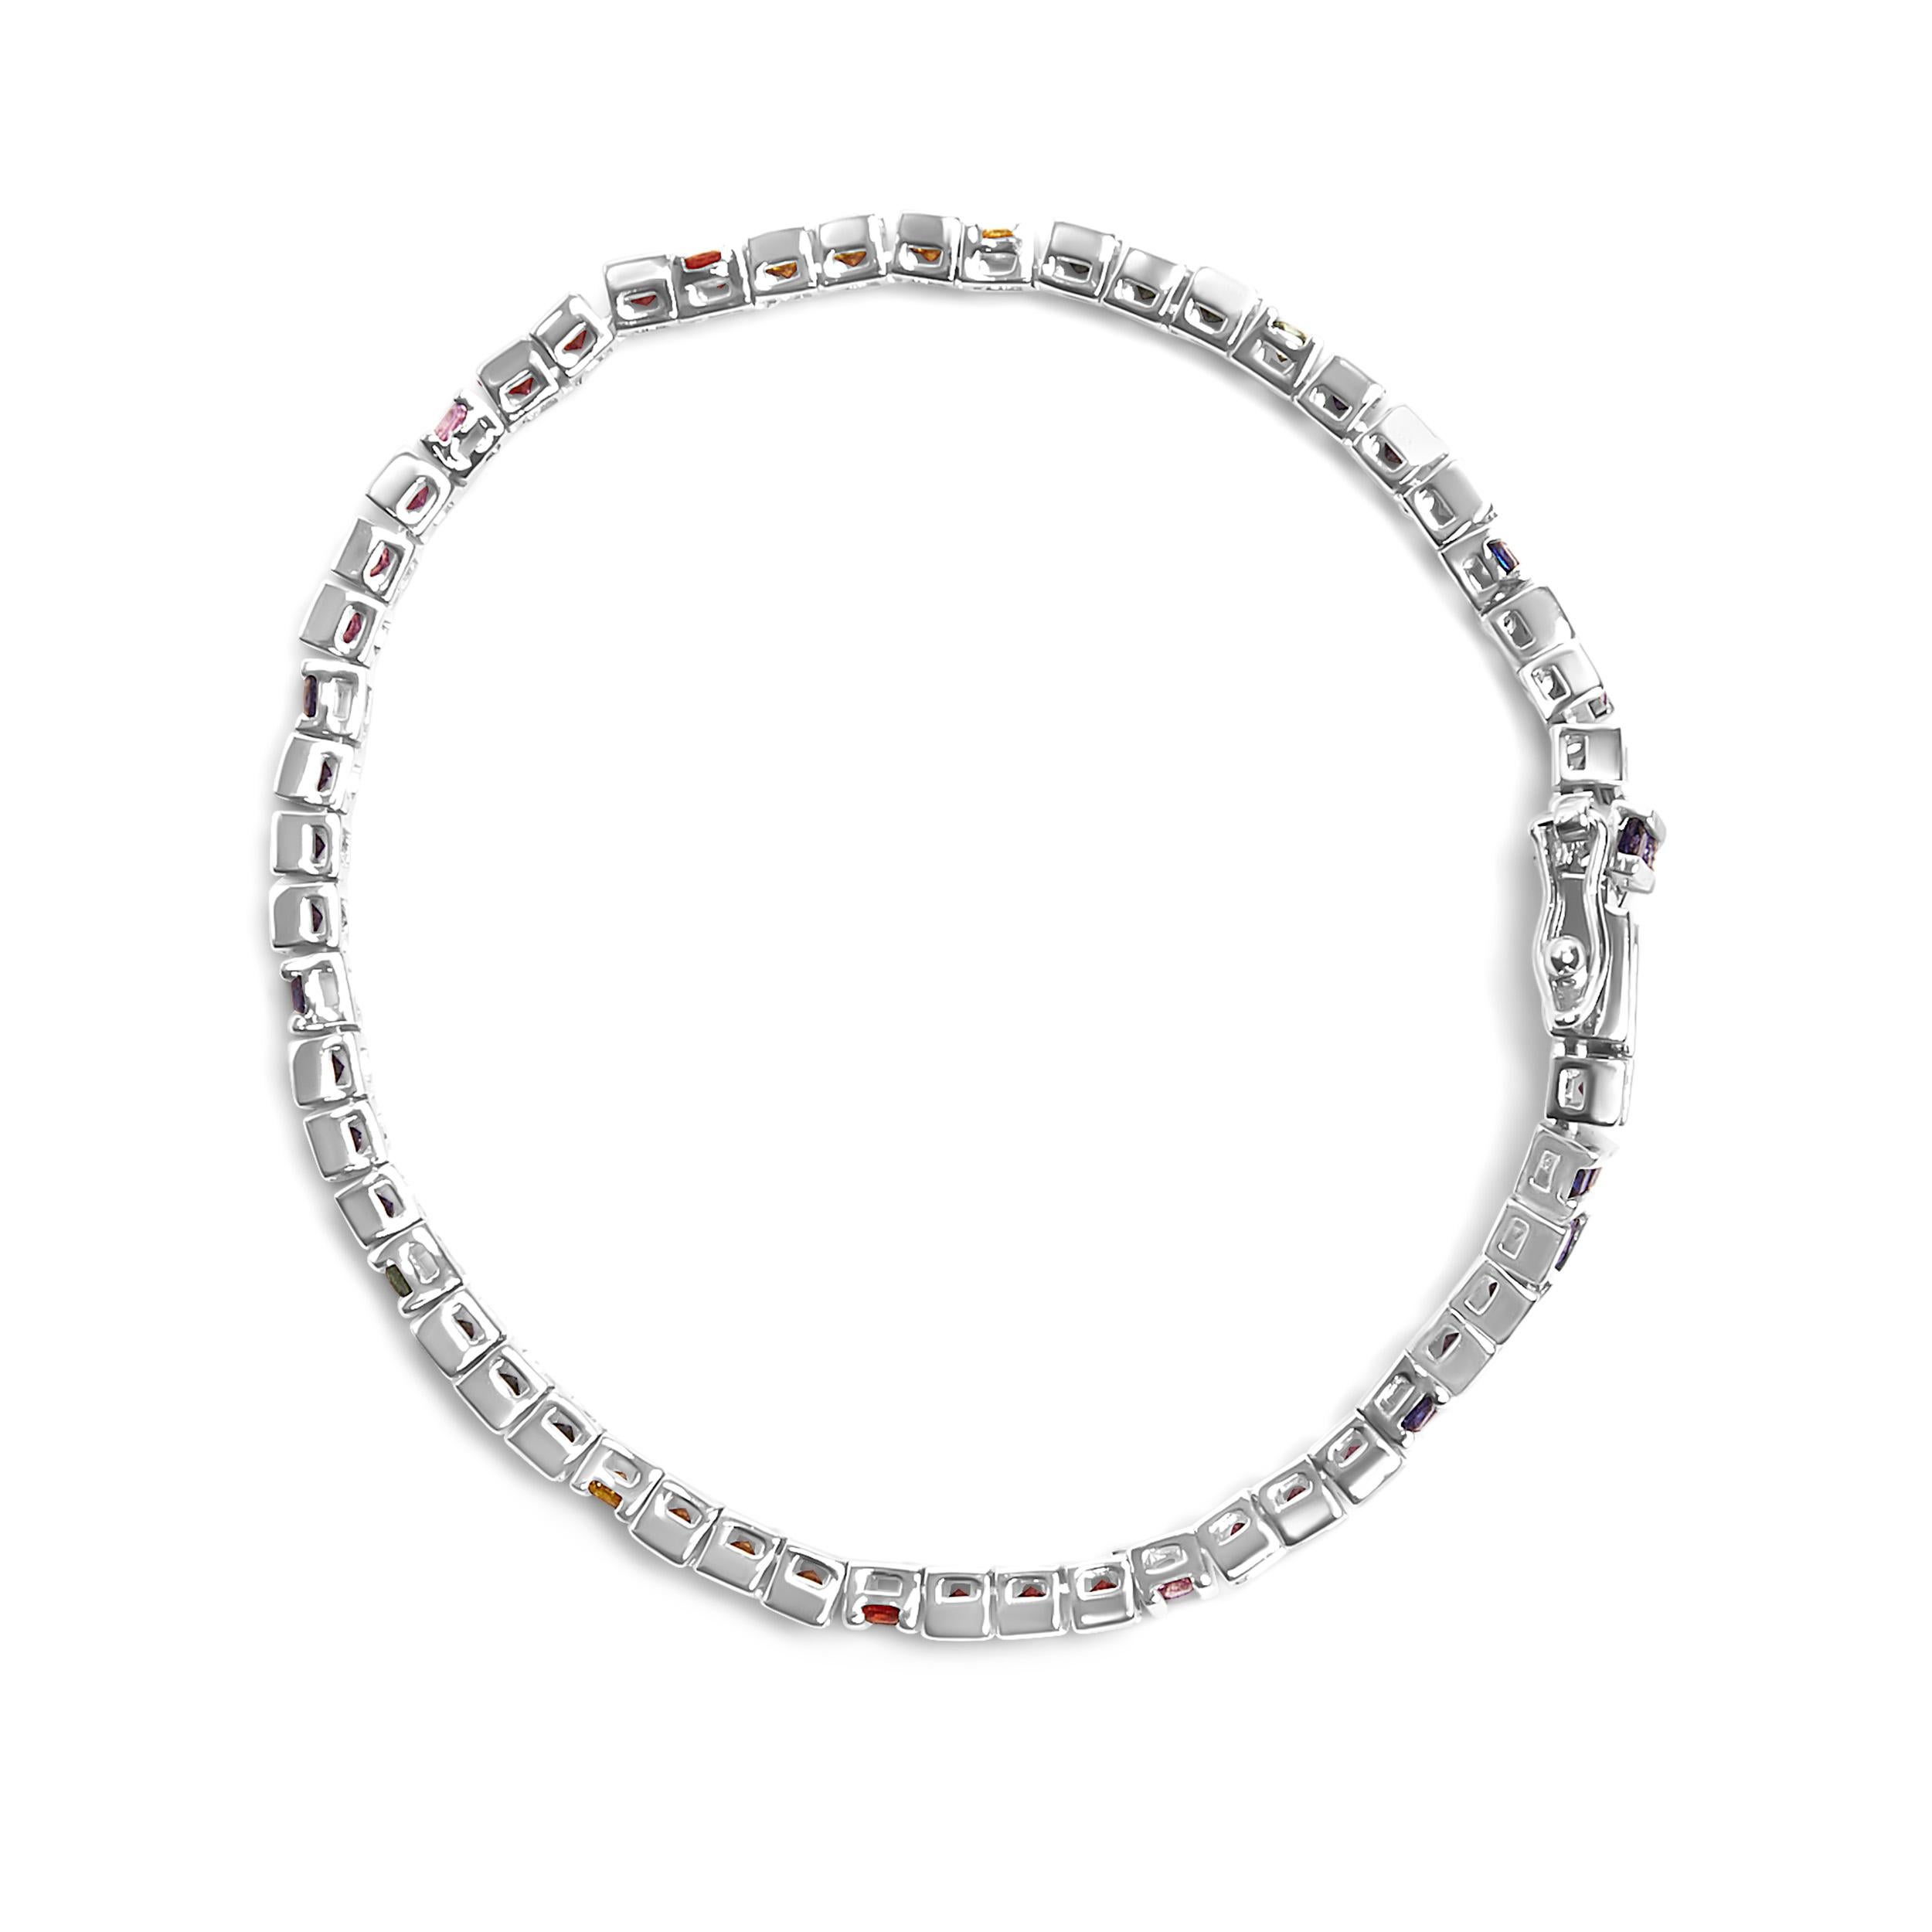 Introducing a mesmerizing masterpiece! Indulge in the allure of this .925 Sterling Silver Multi Colored Princess Cut Gemstone Link Tennis Bracelet. Crafted with love, this exquisite bracelet features 70 princess-cut sapphire gemstones in vibrant